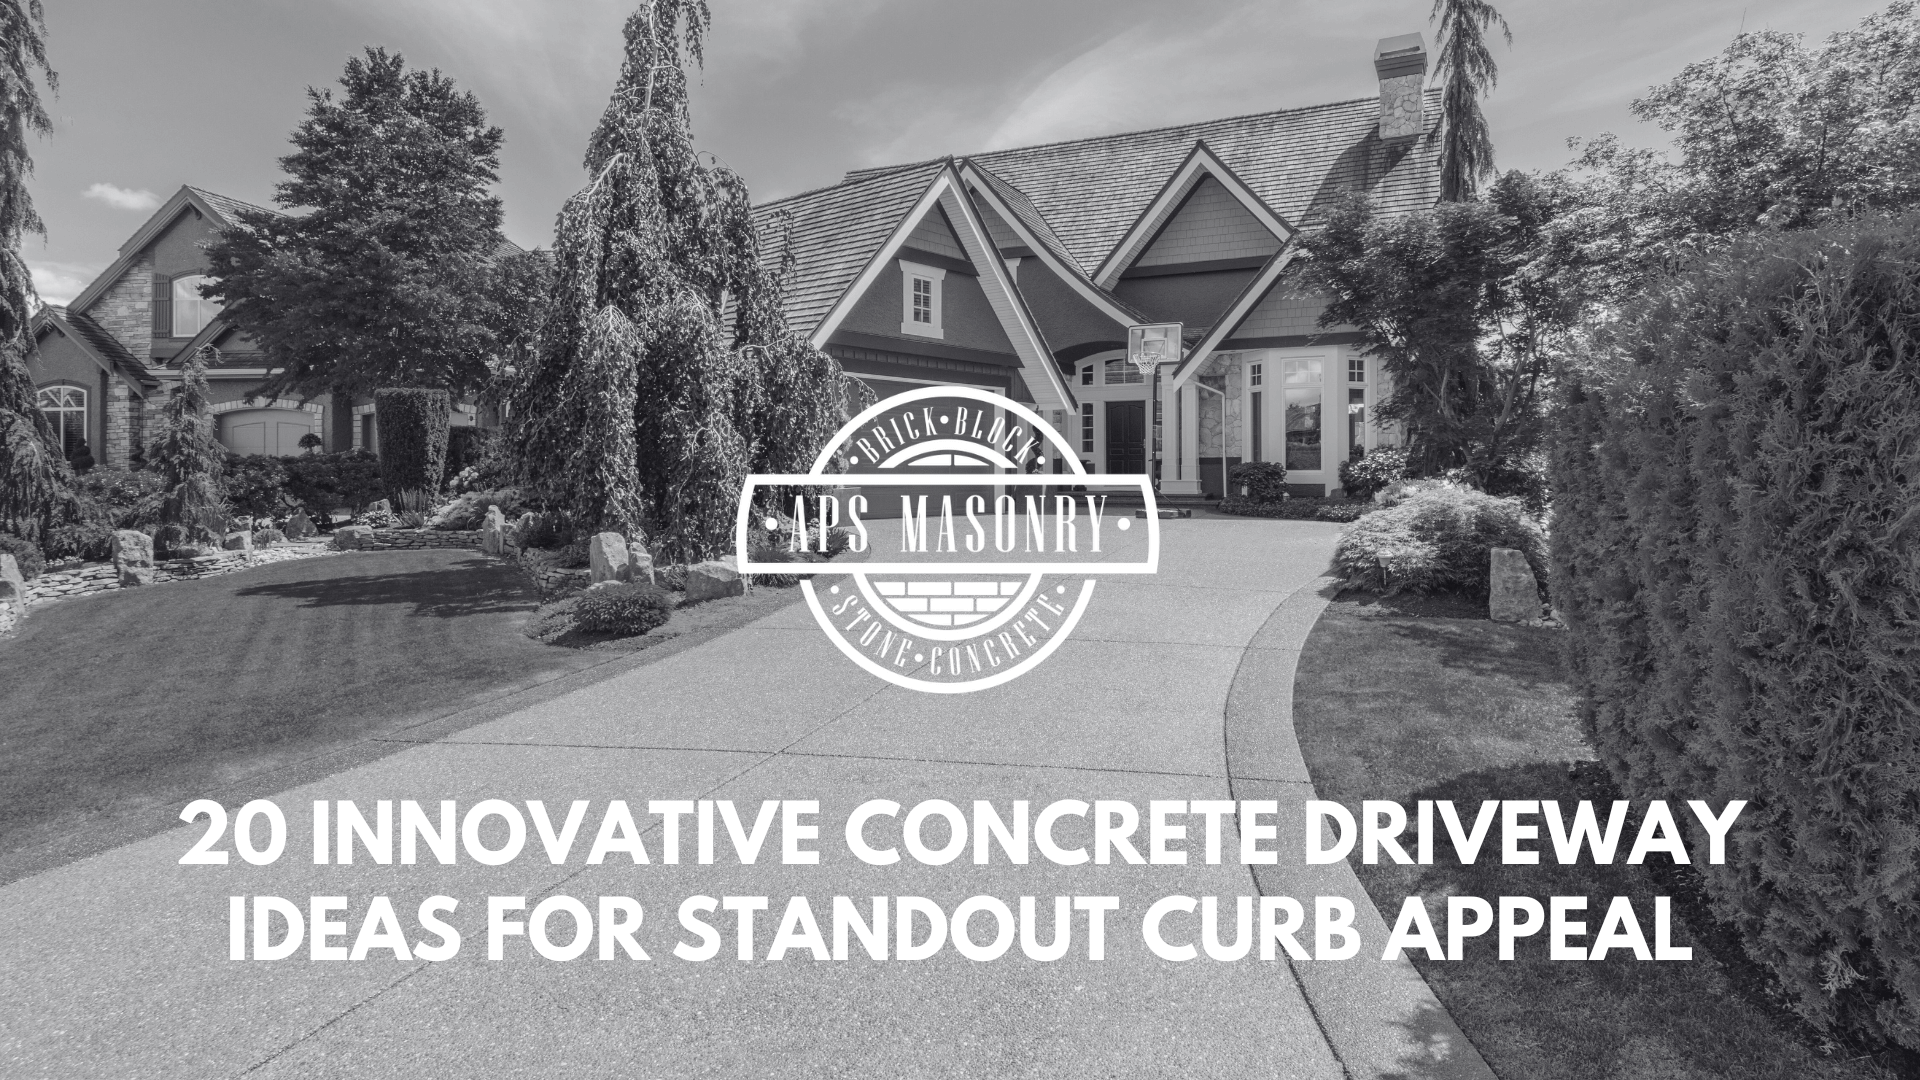 20 Innovative Concrete Driveway Ideas for Standout Curb Appeal